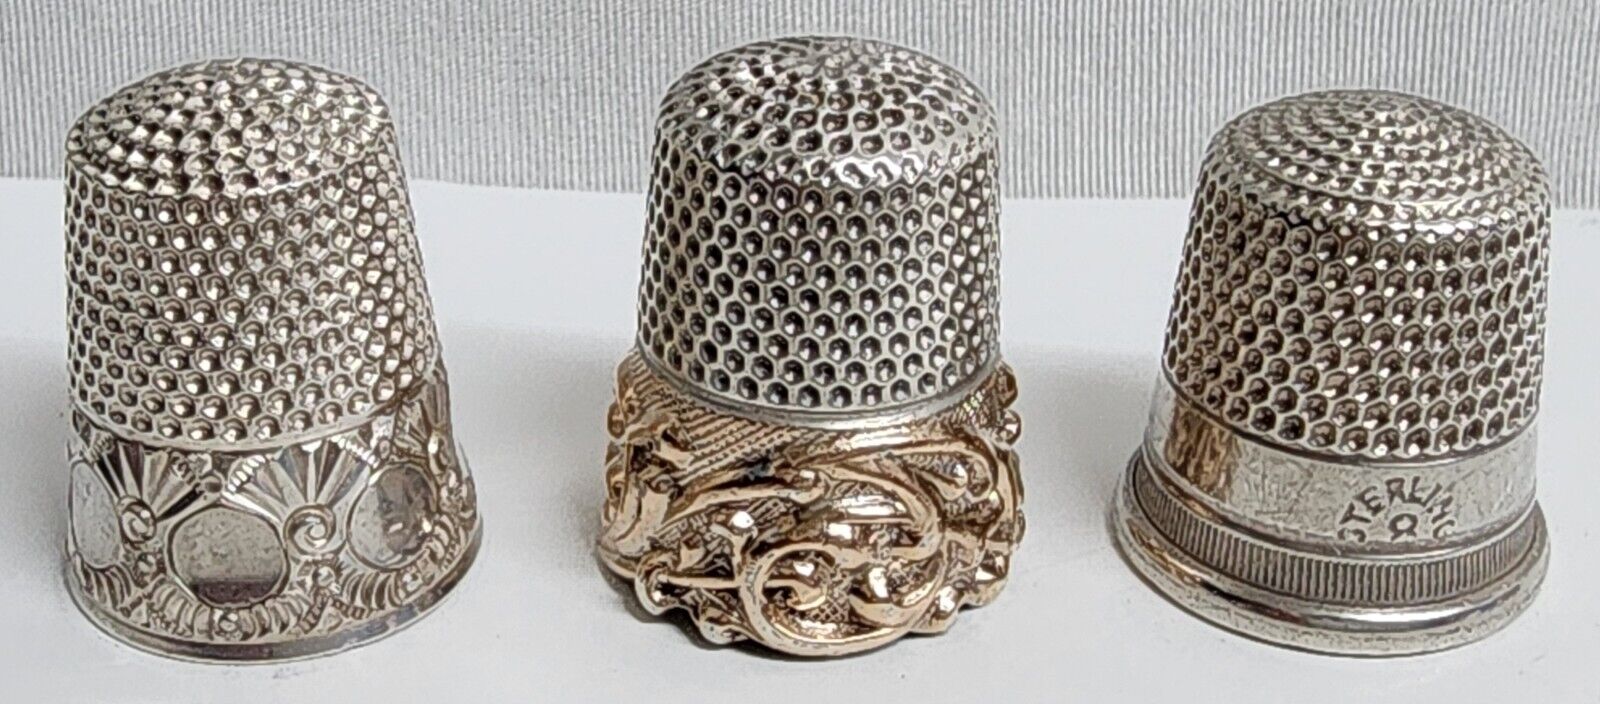 Lot of 3 Vintage Thimbles Sizes - 8,8,7 - Metals 925GP, 925, 900 Coin Silver